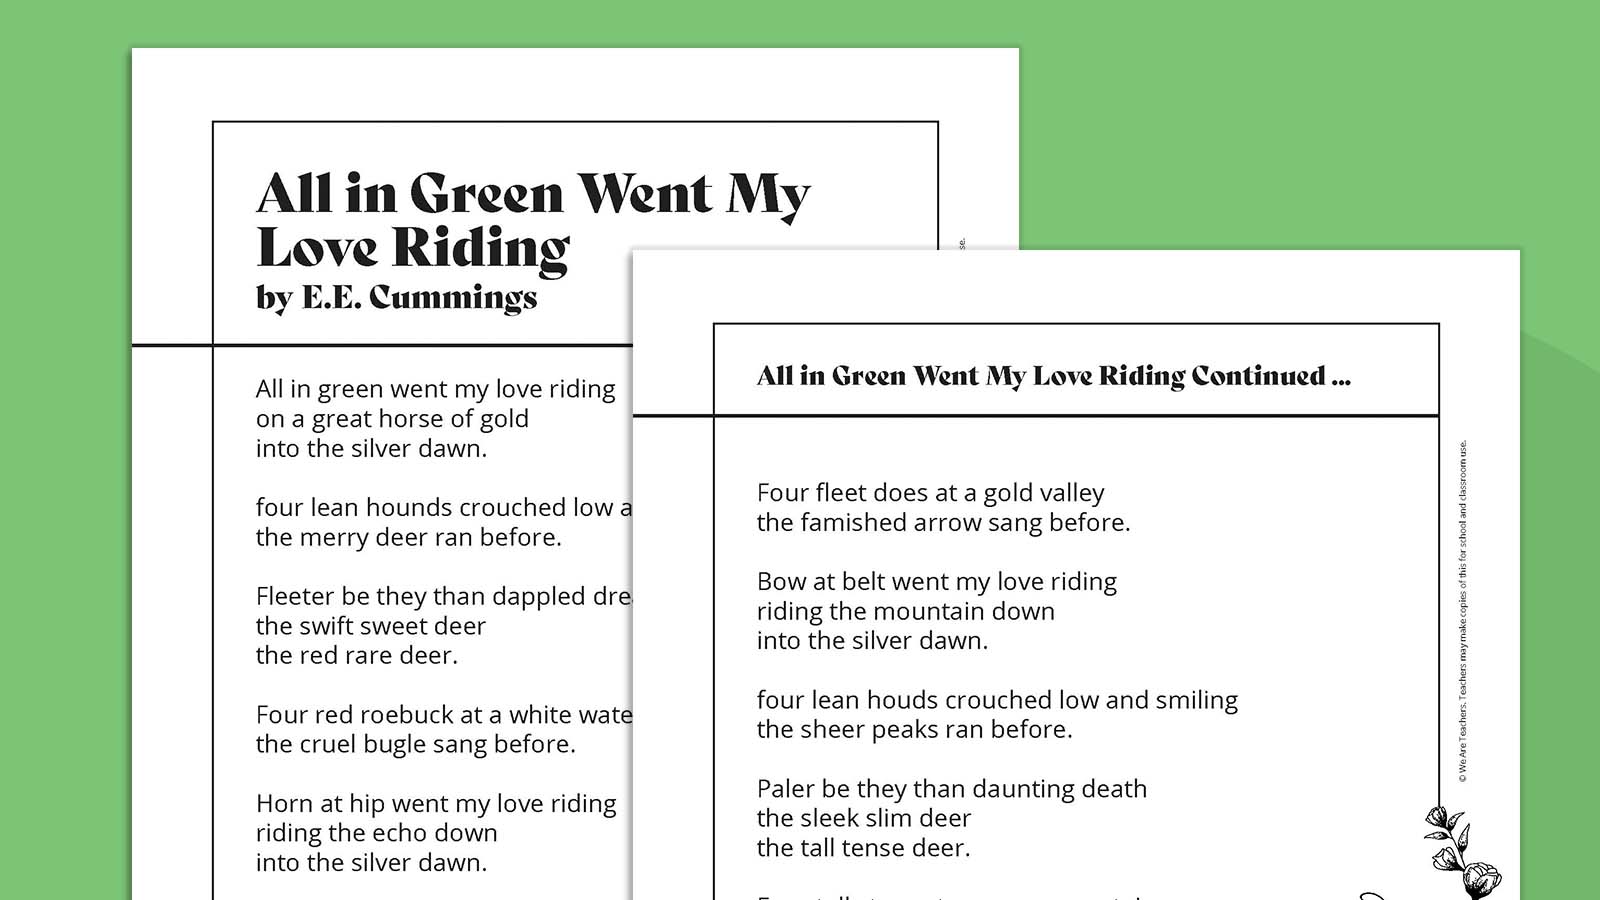 All in green went my love riding
on a great horse of gold
into the silver dawn.